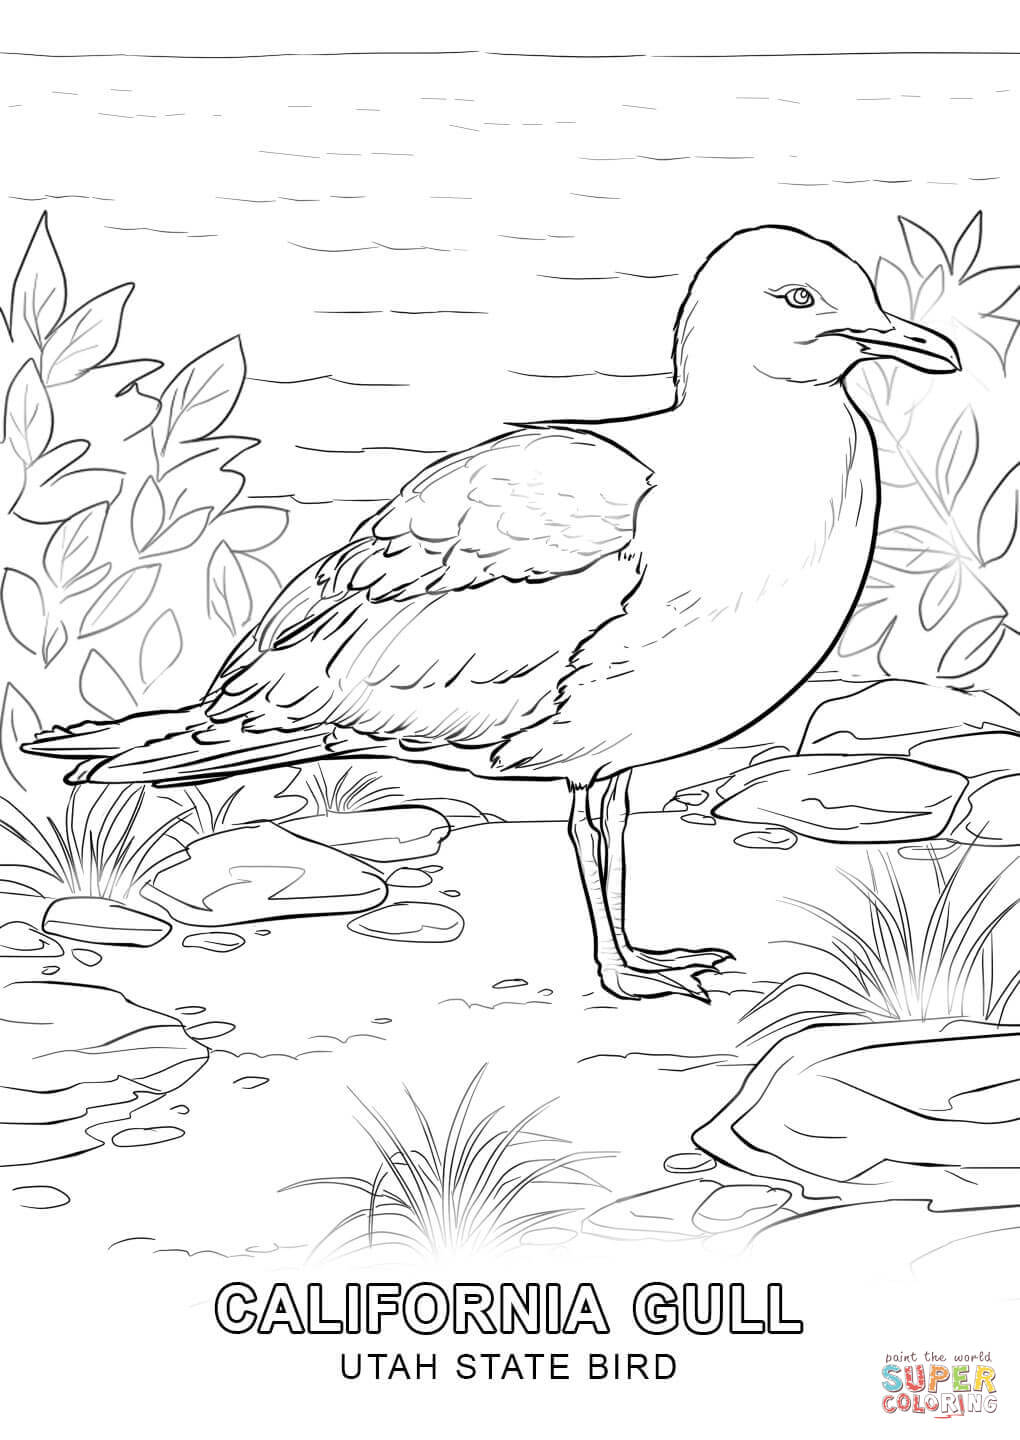 Utah state bird coloring page free printable coloring pages